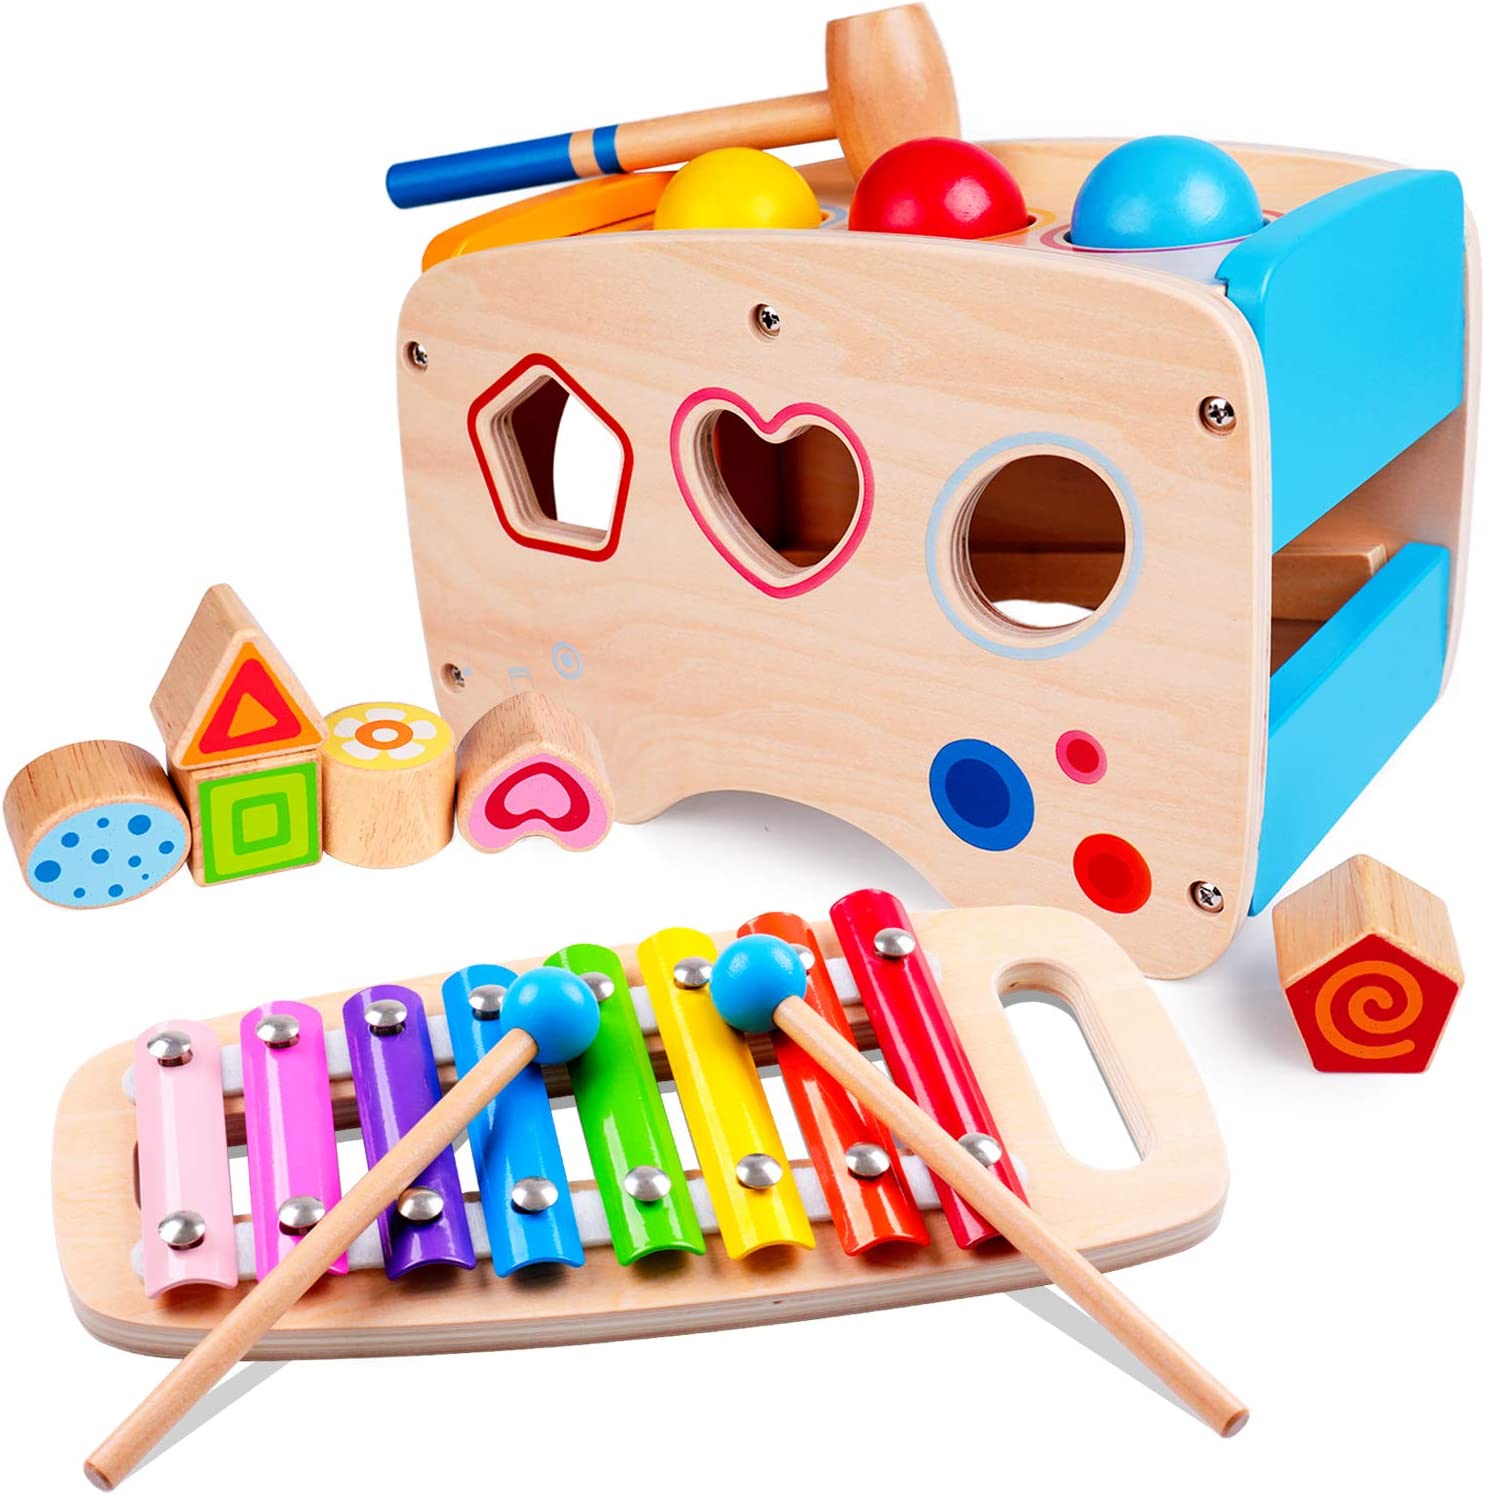 Rolimate Educational Wooden Toy